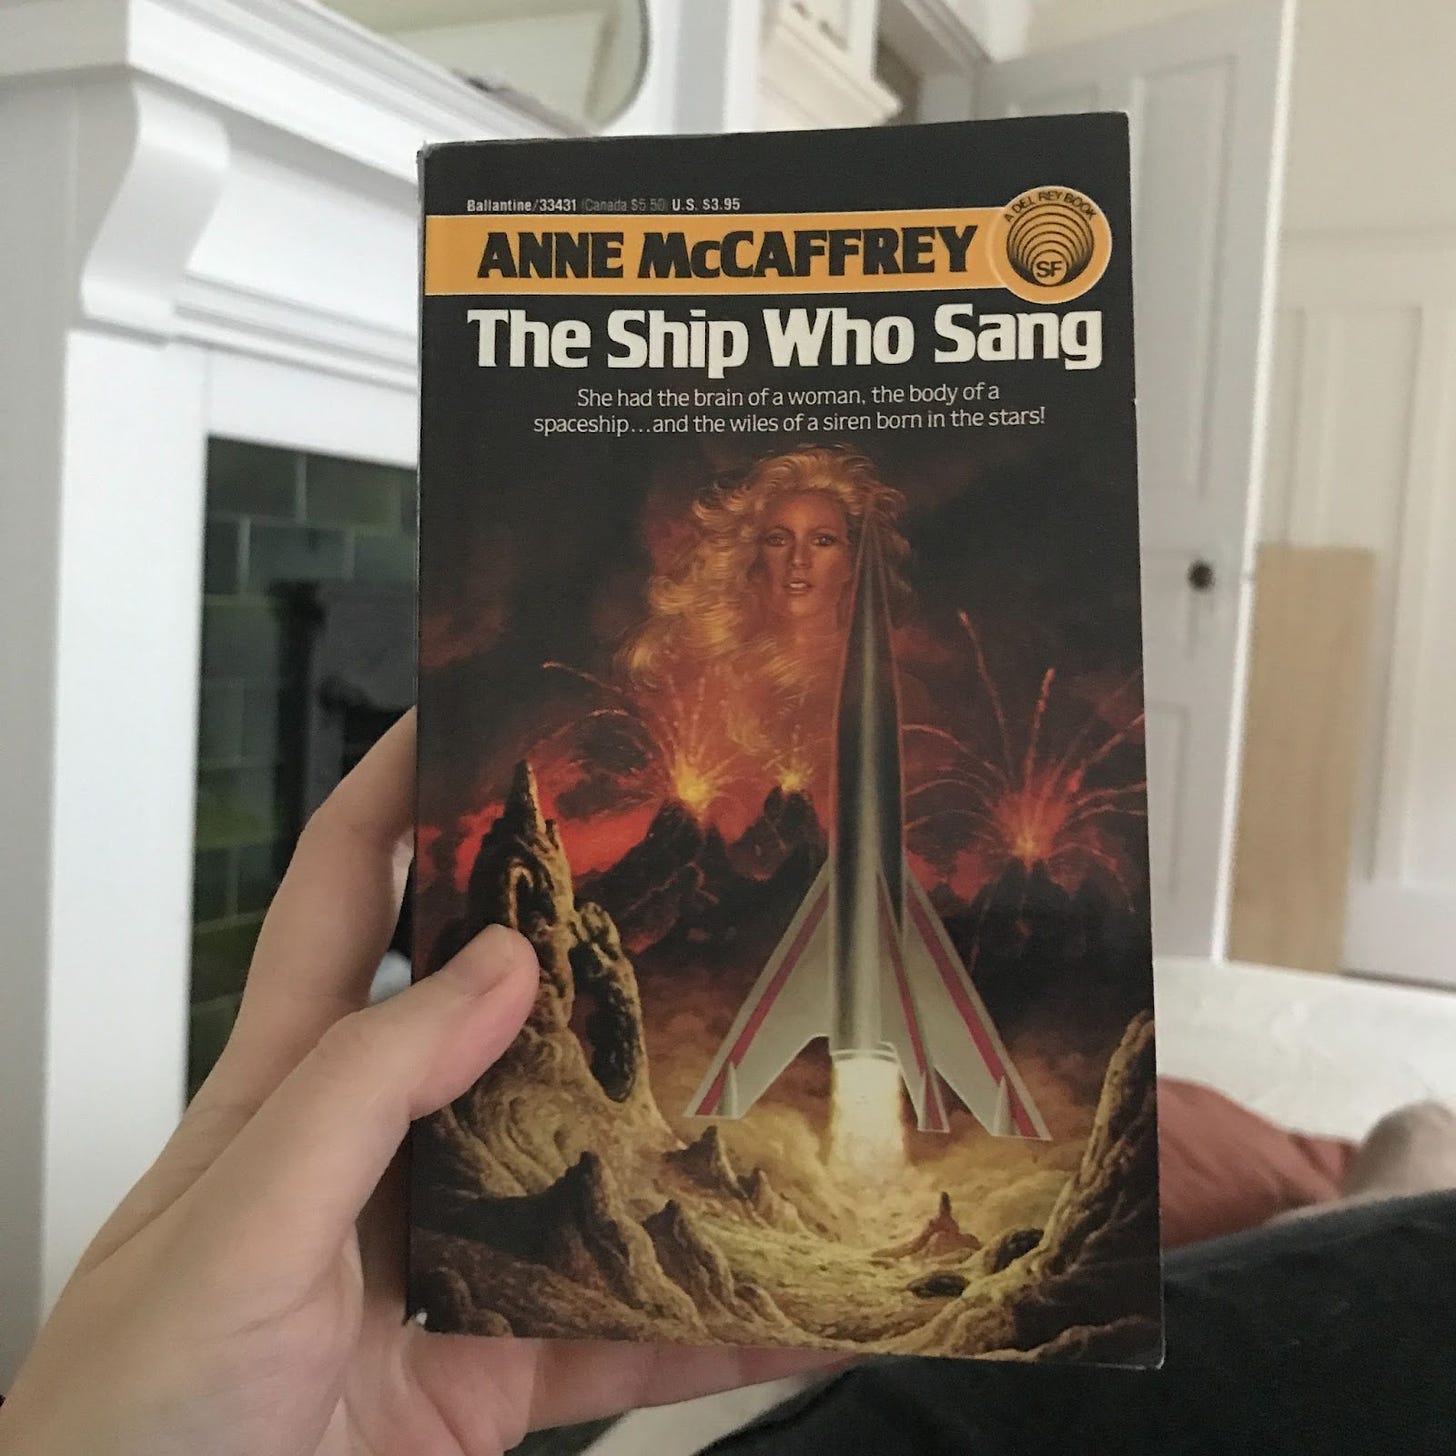 My hand holding a paperback copy of Anne McCaffrey’s The Ship Who Sang.